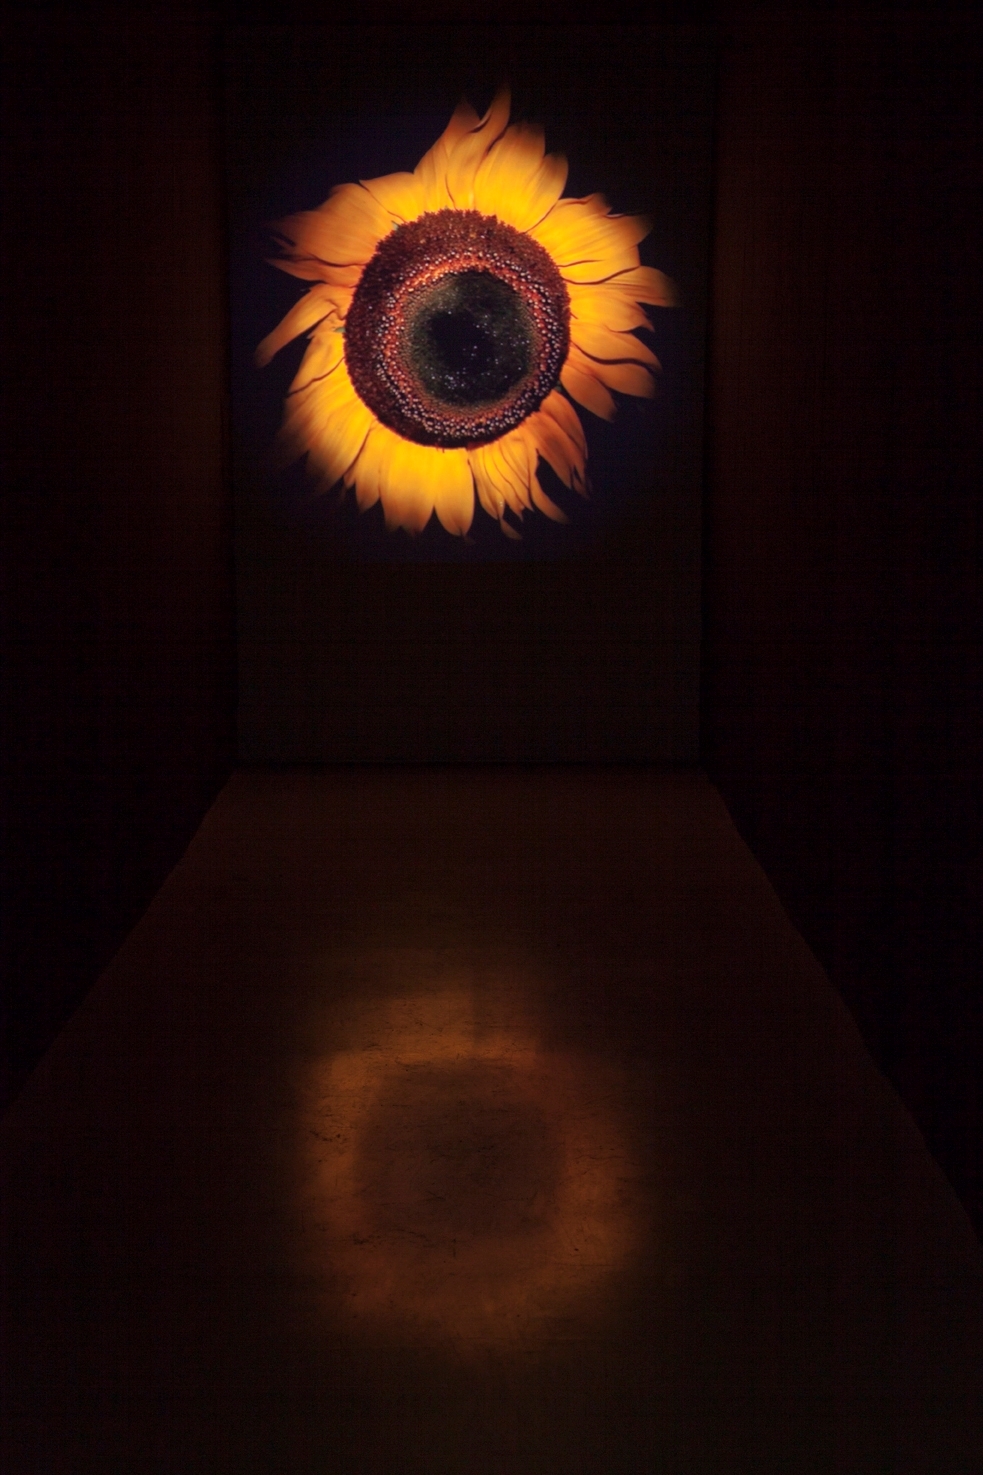 Still image of the head of a sunflower in a dark room. 